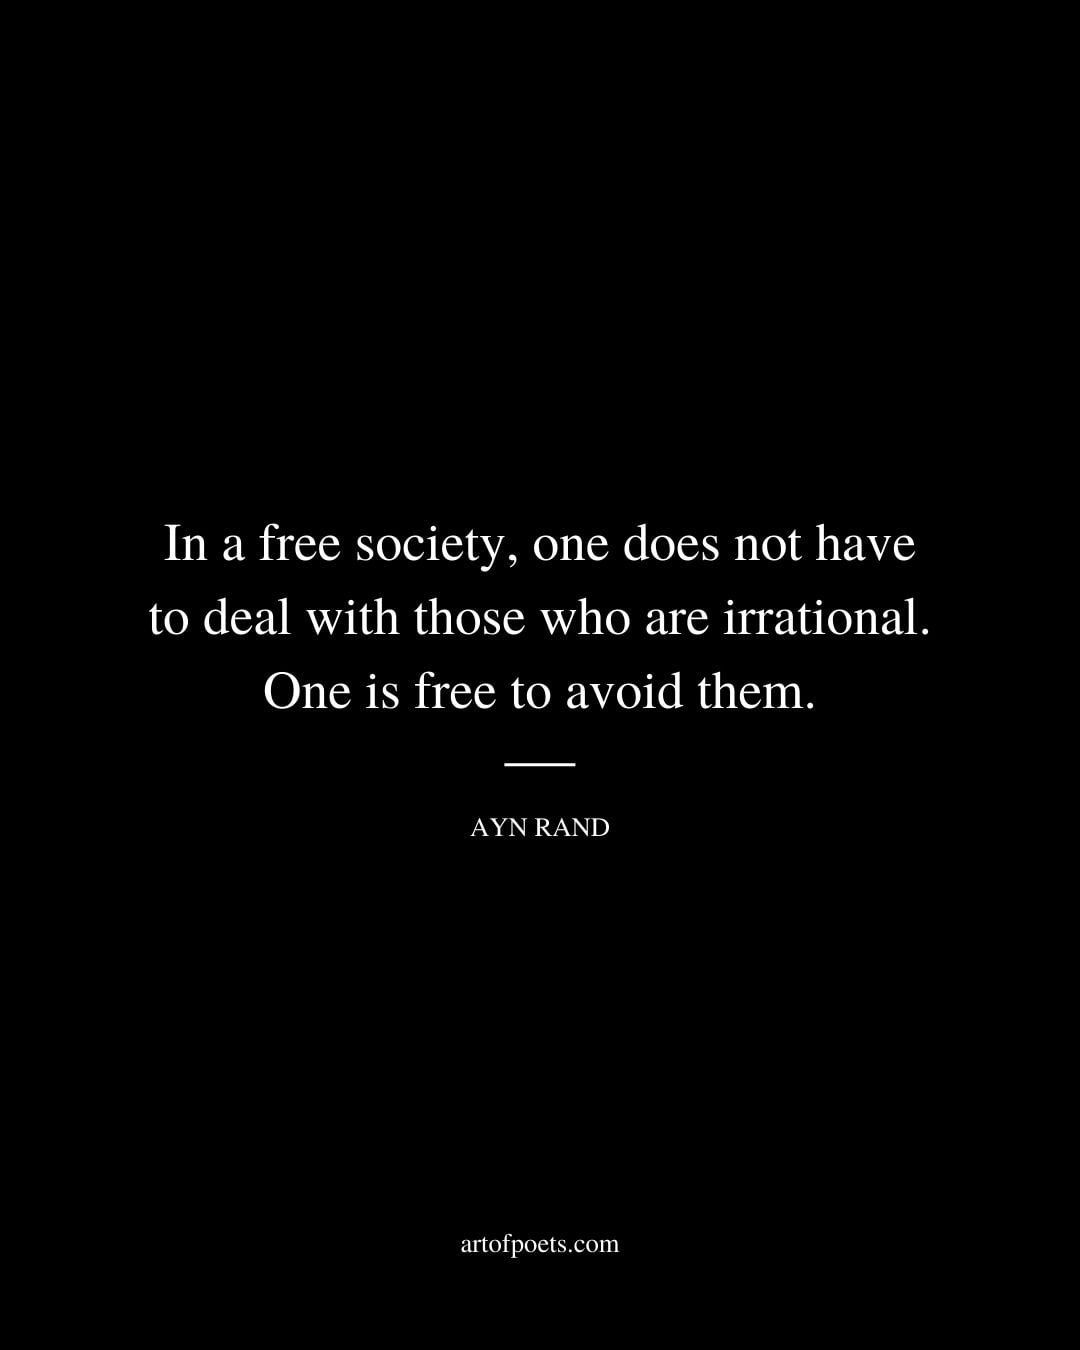 In a free society one does not have to deal with those who are irrational. One is free to avoid them